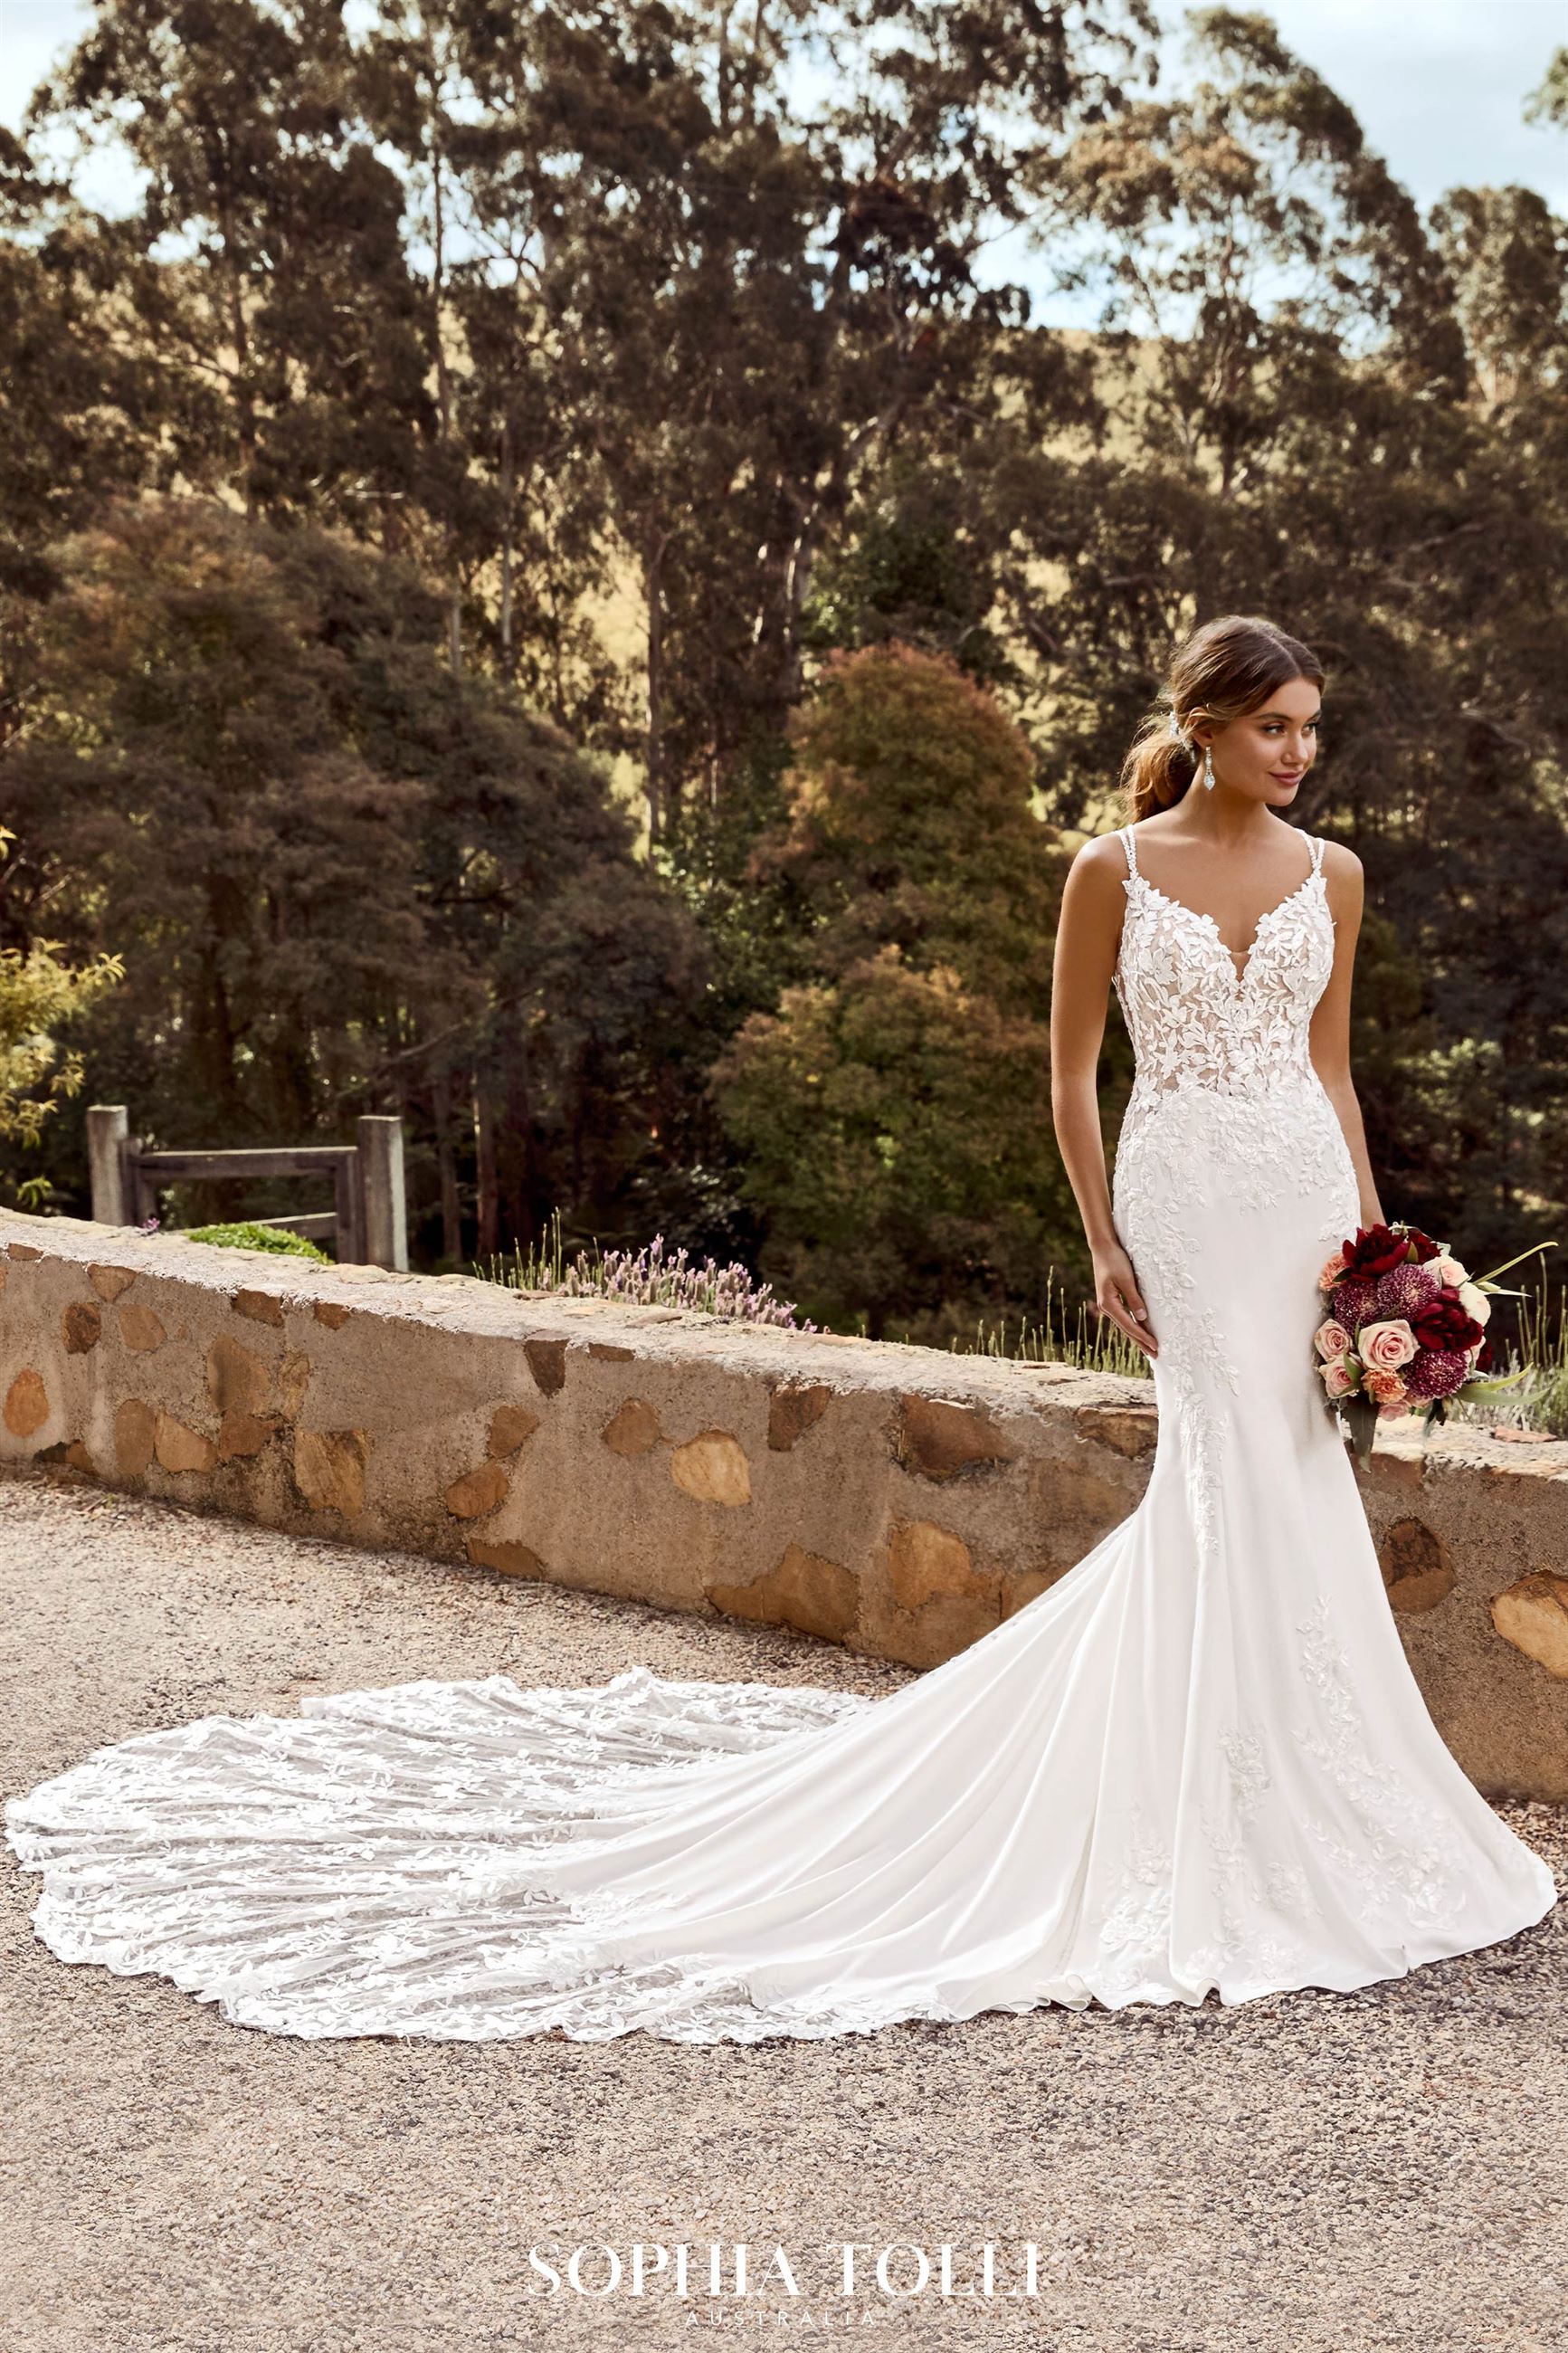 Floral Crepe Wedding Dress with Lace Train